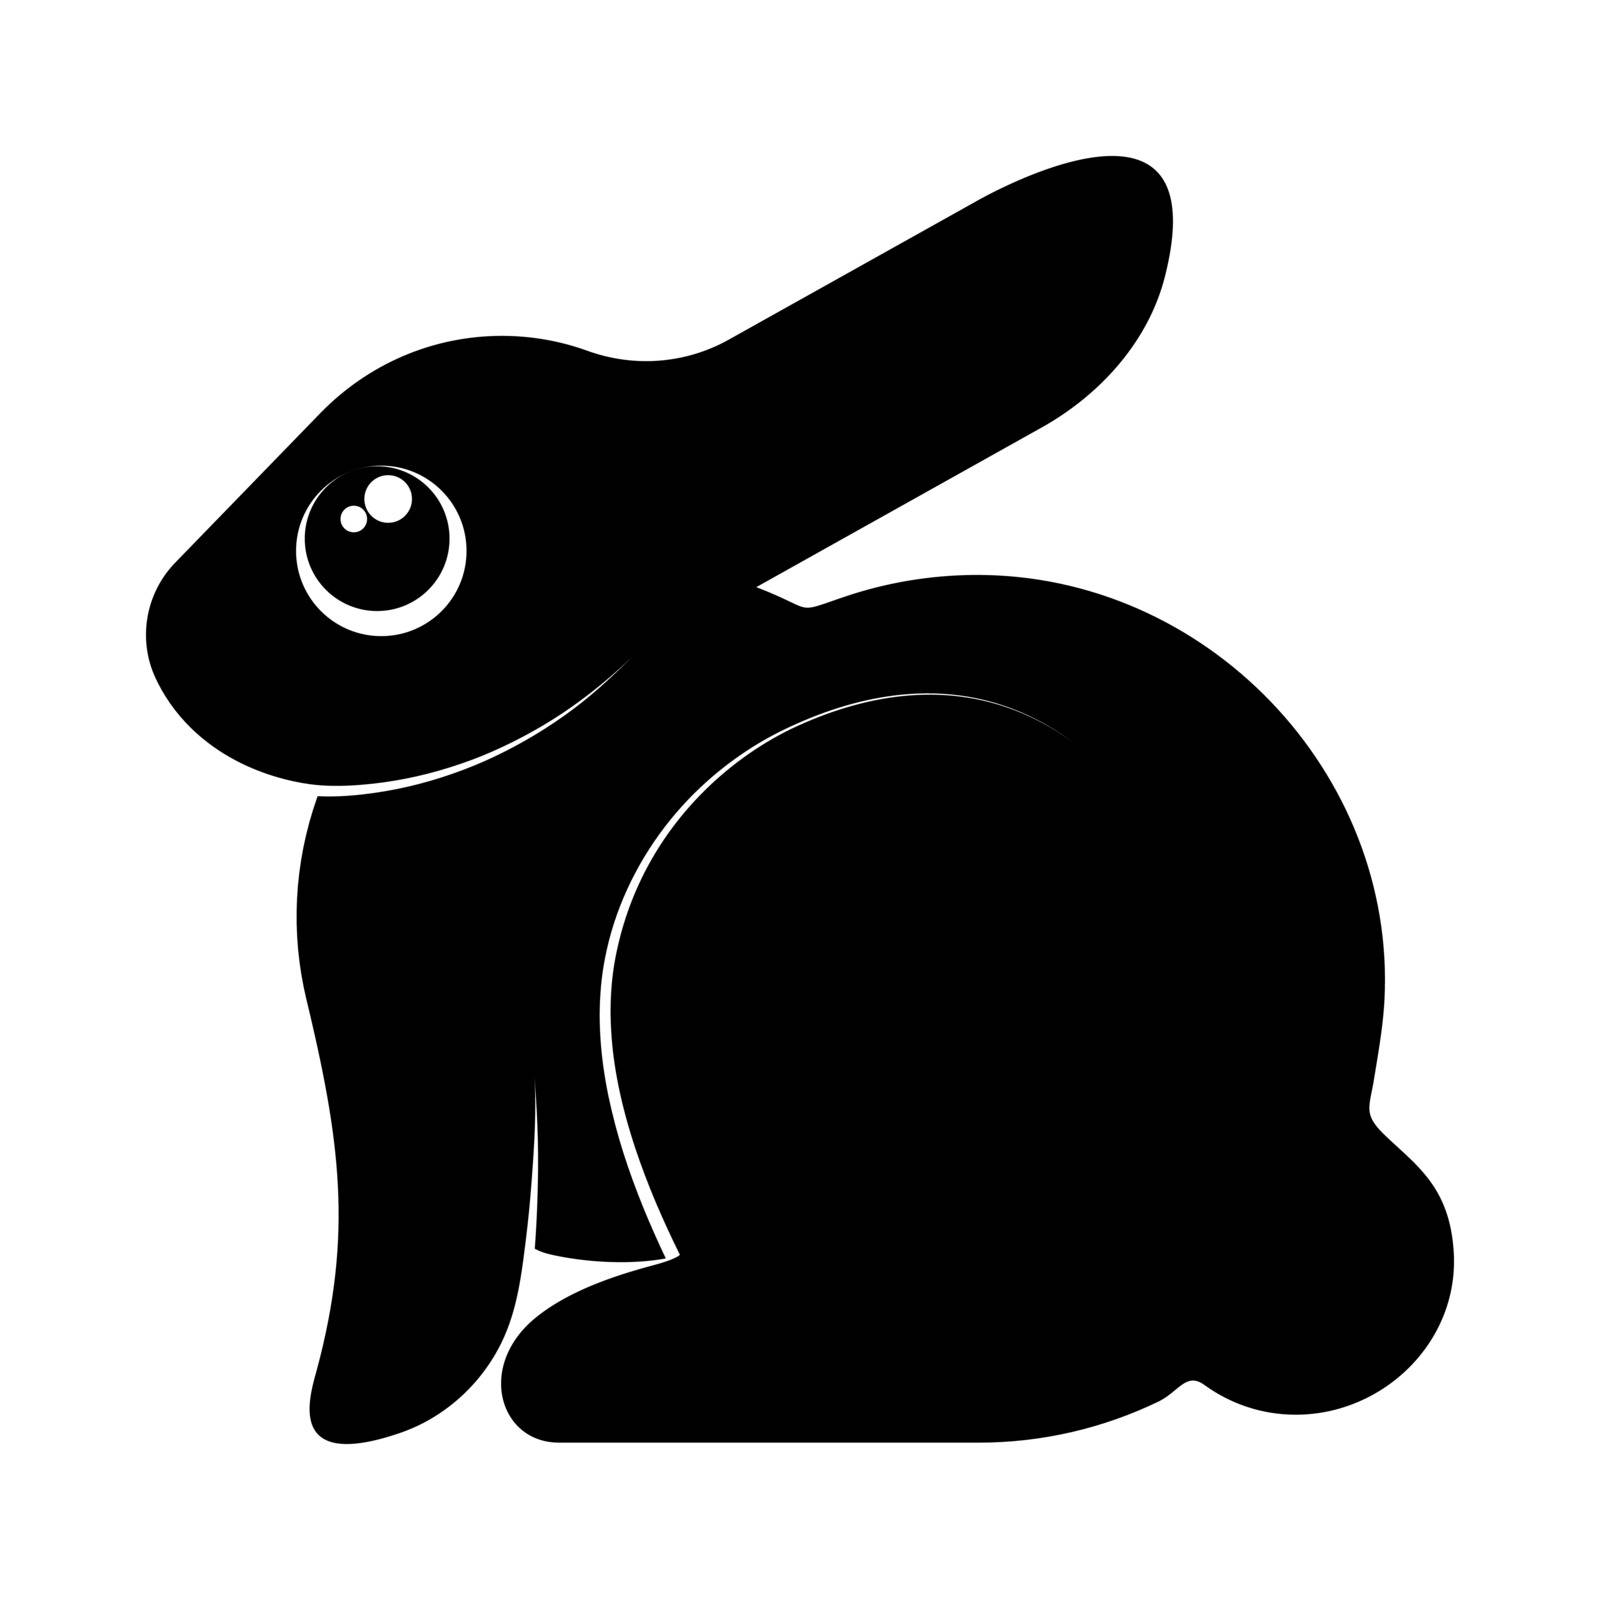 Black rabbit silhouette isolated on white background. Vector ill by Takita1979